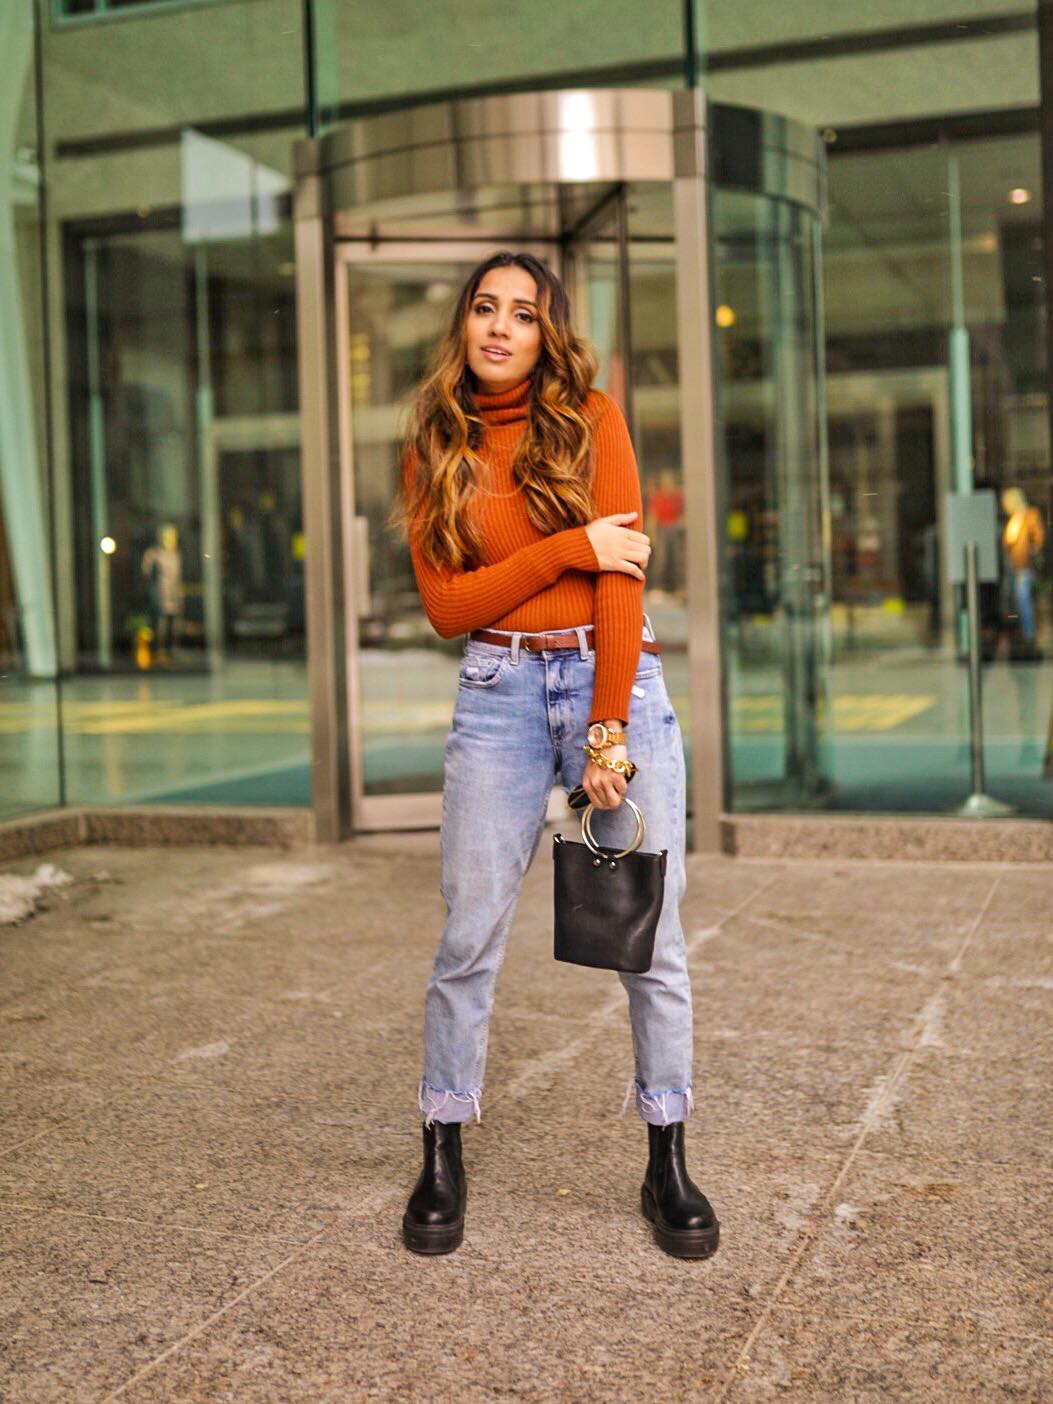 Street Style Boyfriend Jeans Toronto Fashion Week Ootd Hm Jeans Asos Boots Faiza Inam Sincerely Humble 2 Sincerely Humble